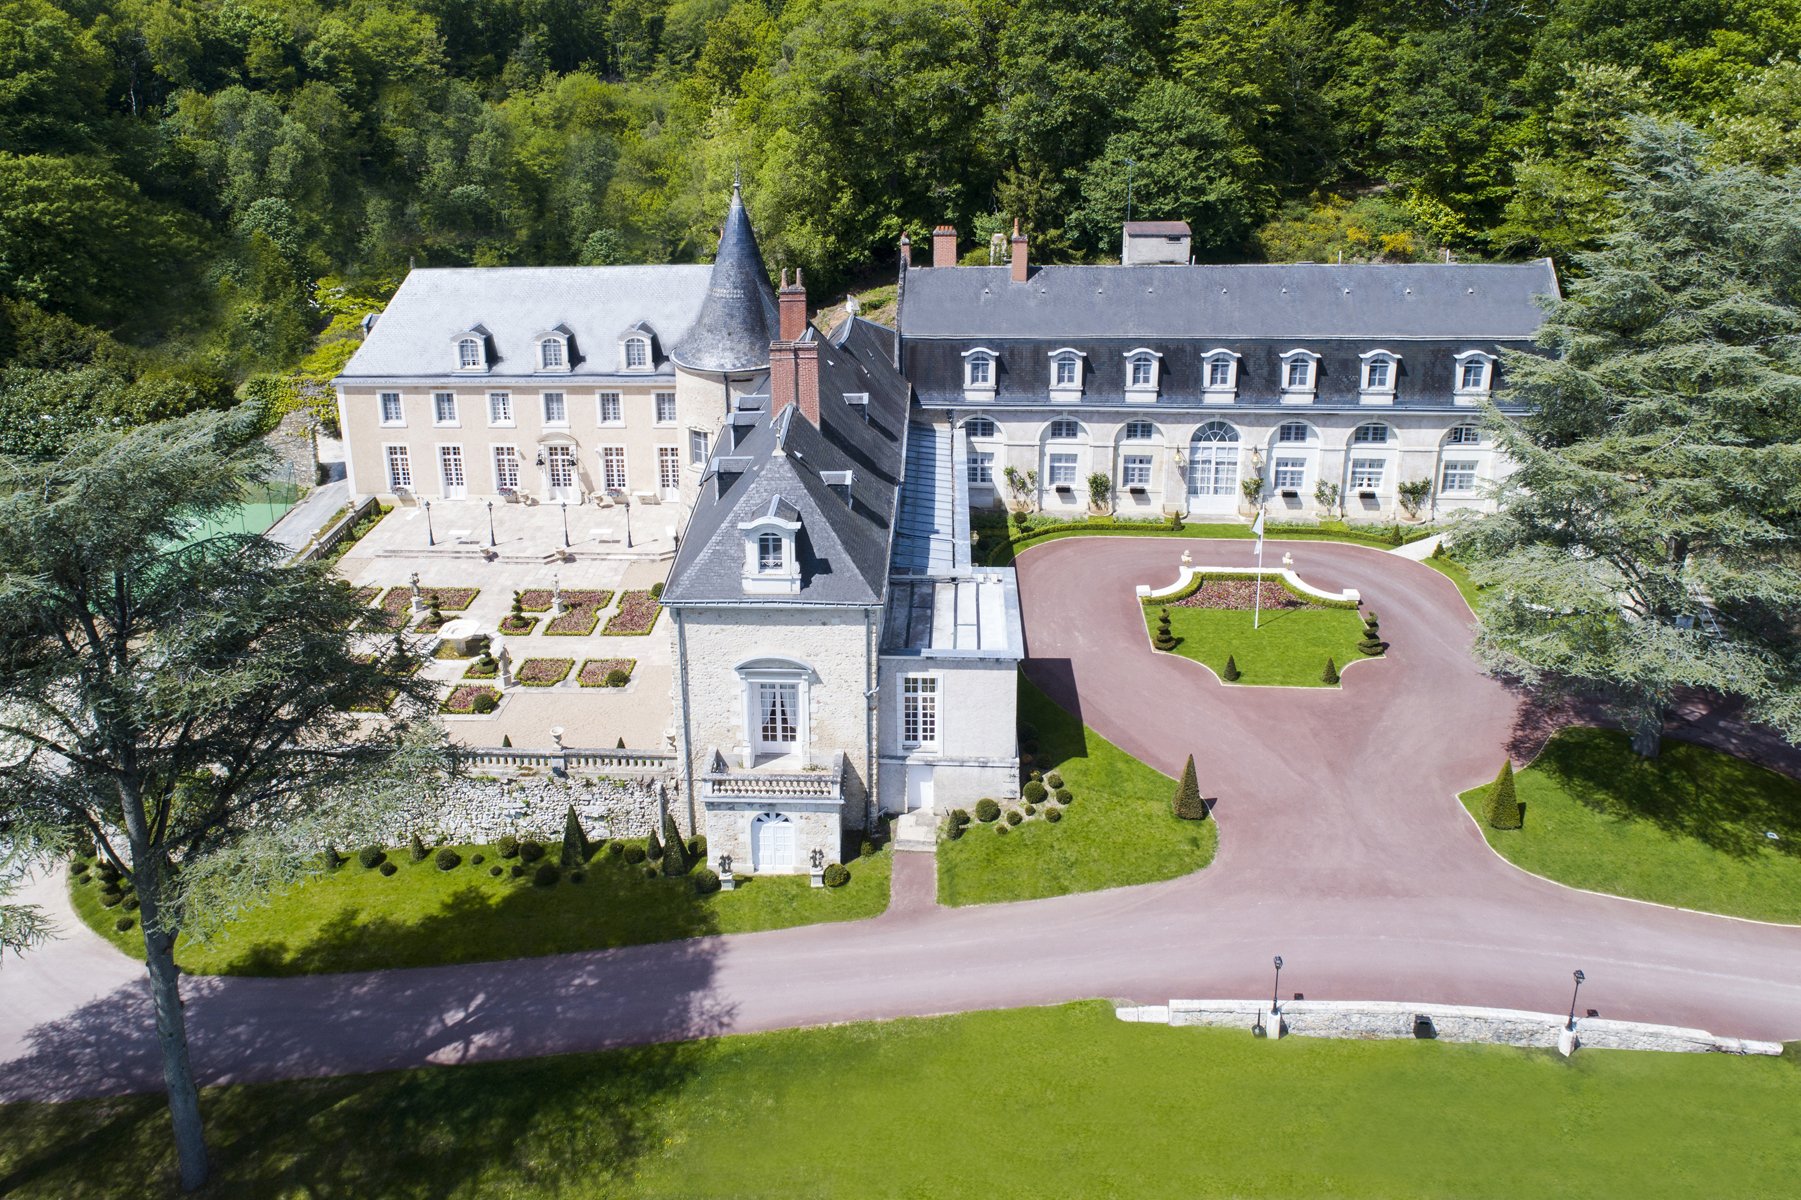 Château de Beauvois | 4star Hotel, gourmet restaurant, swimming pool | In the Loire Valley, 20 minutes from Tours, France